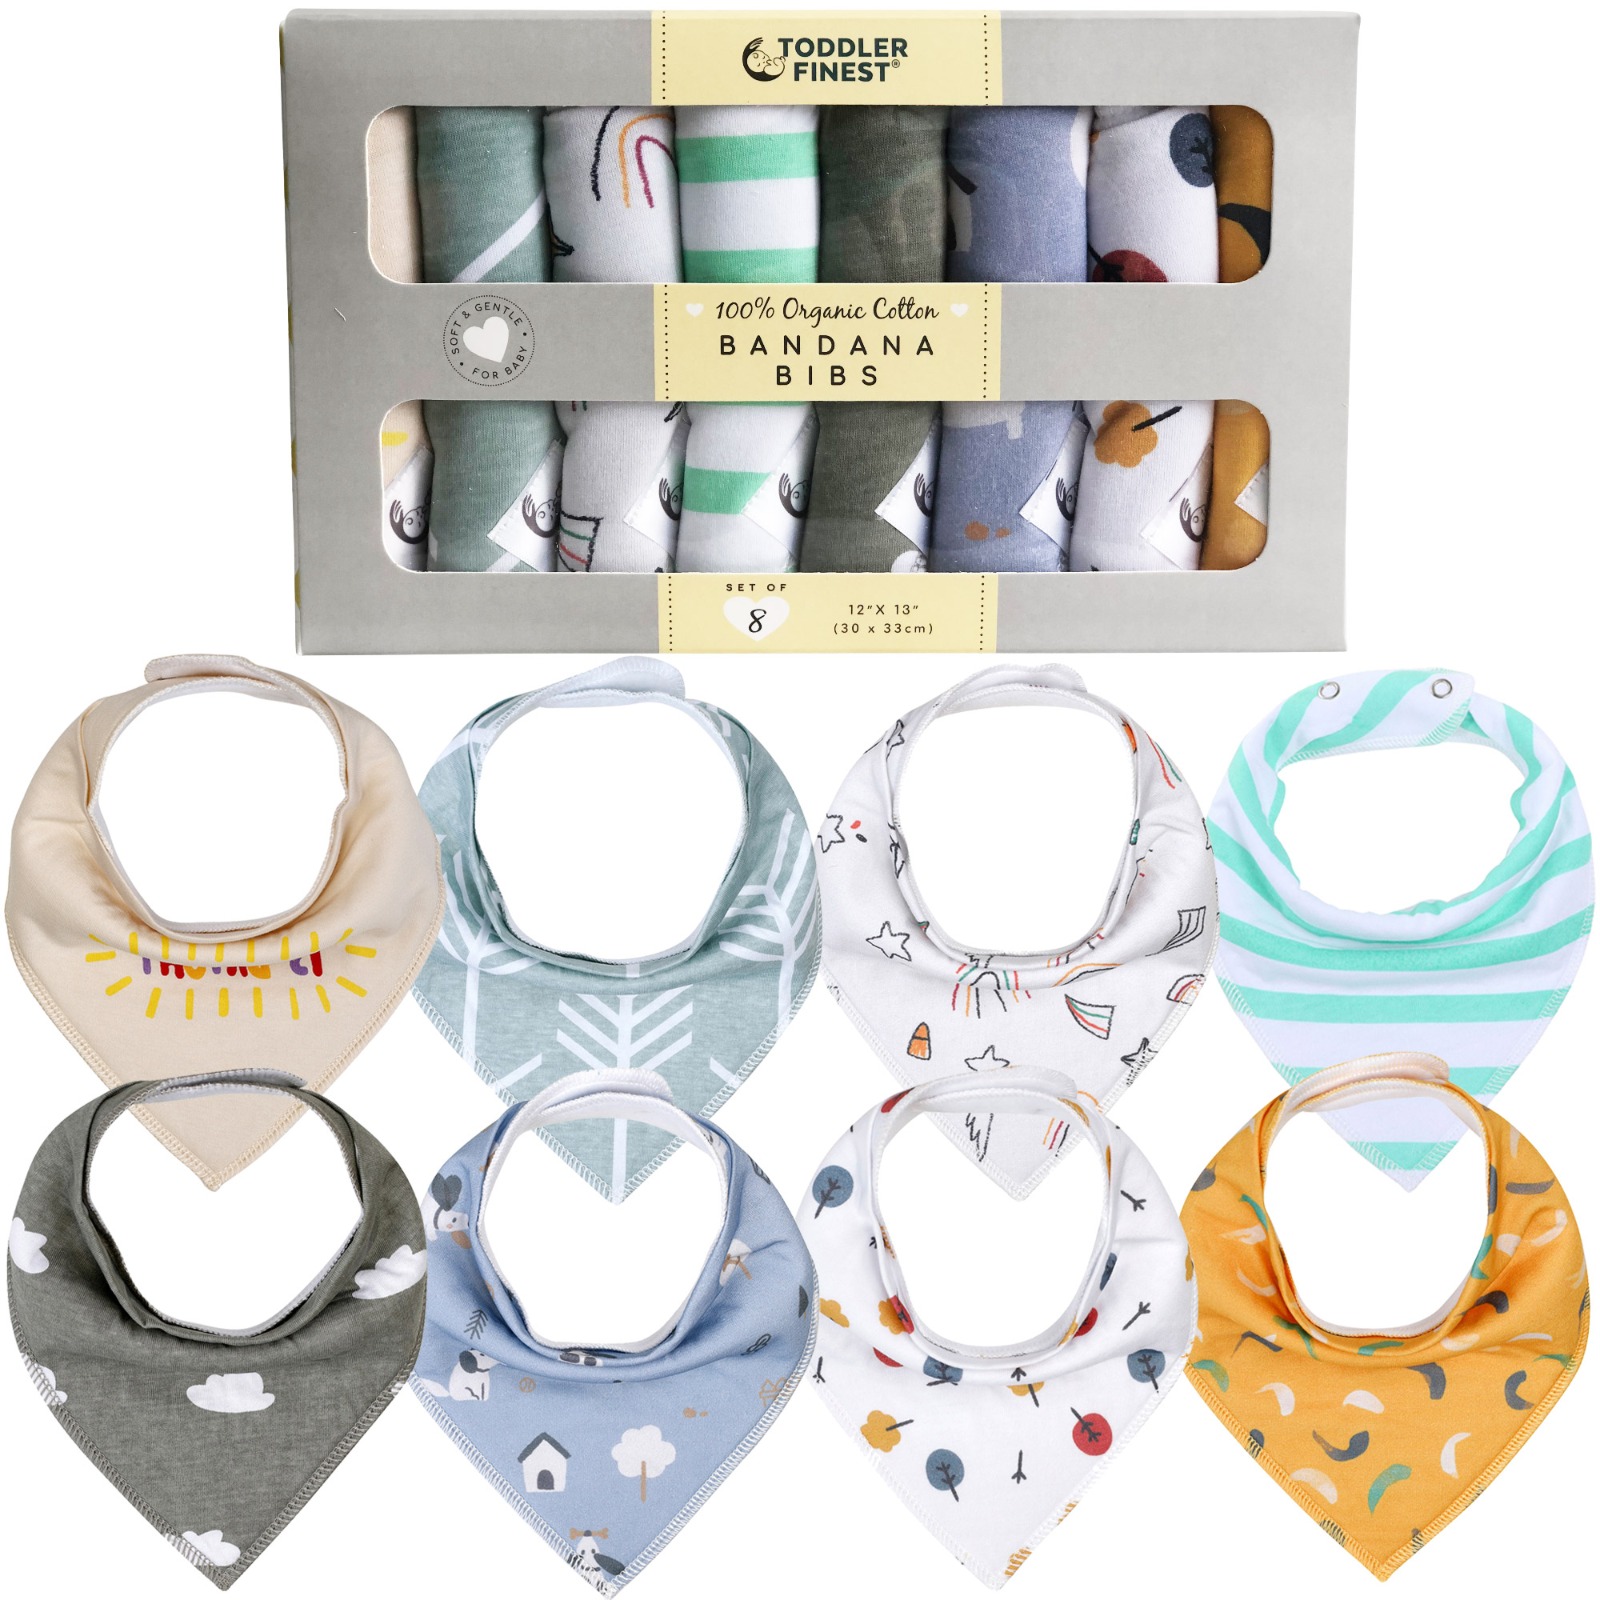 ToddlerFinest 8-Pack Organic Cotton Baby Bandana Drool Bibs GIft Set for Drooling and Teething